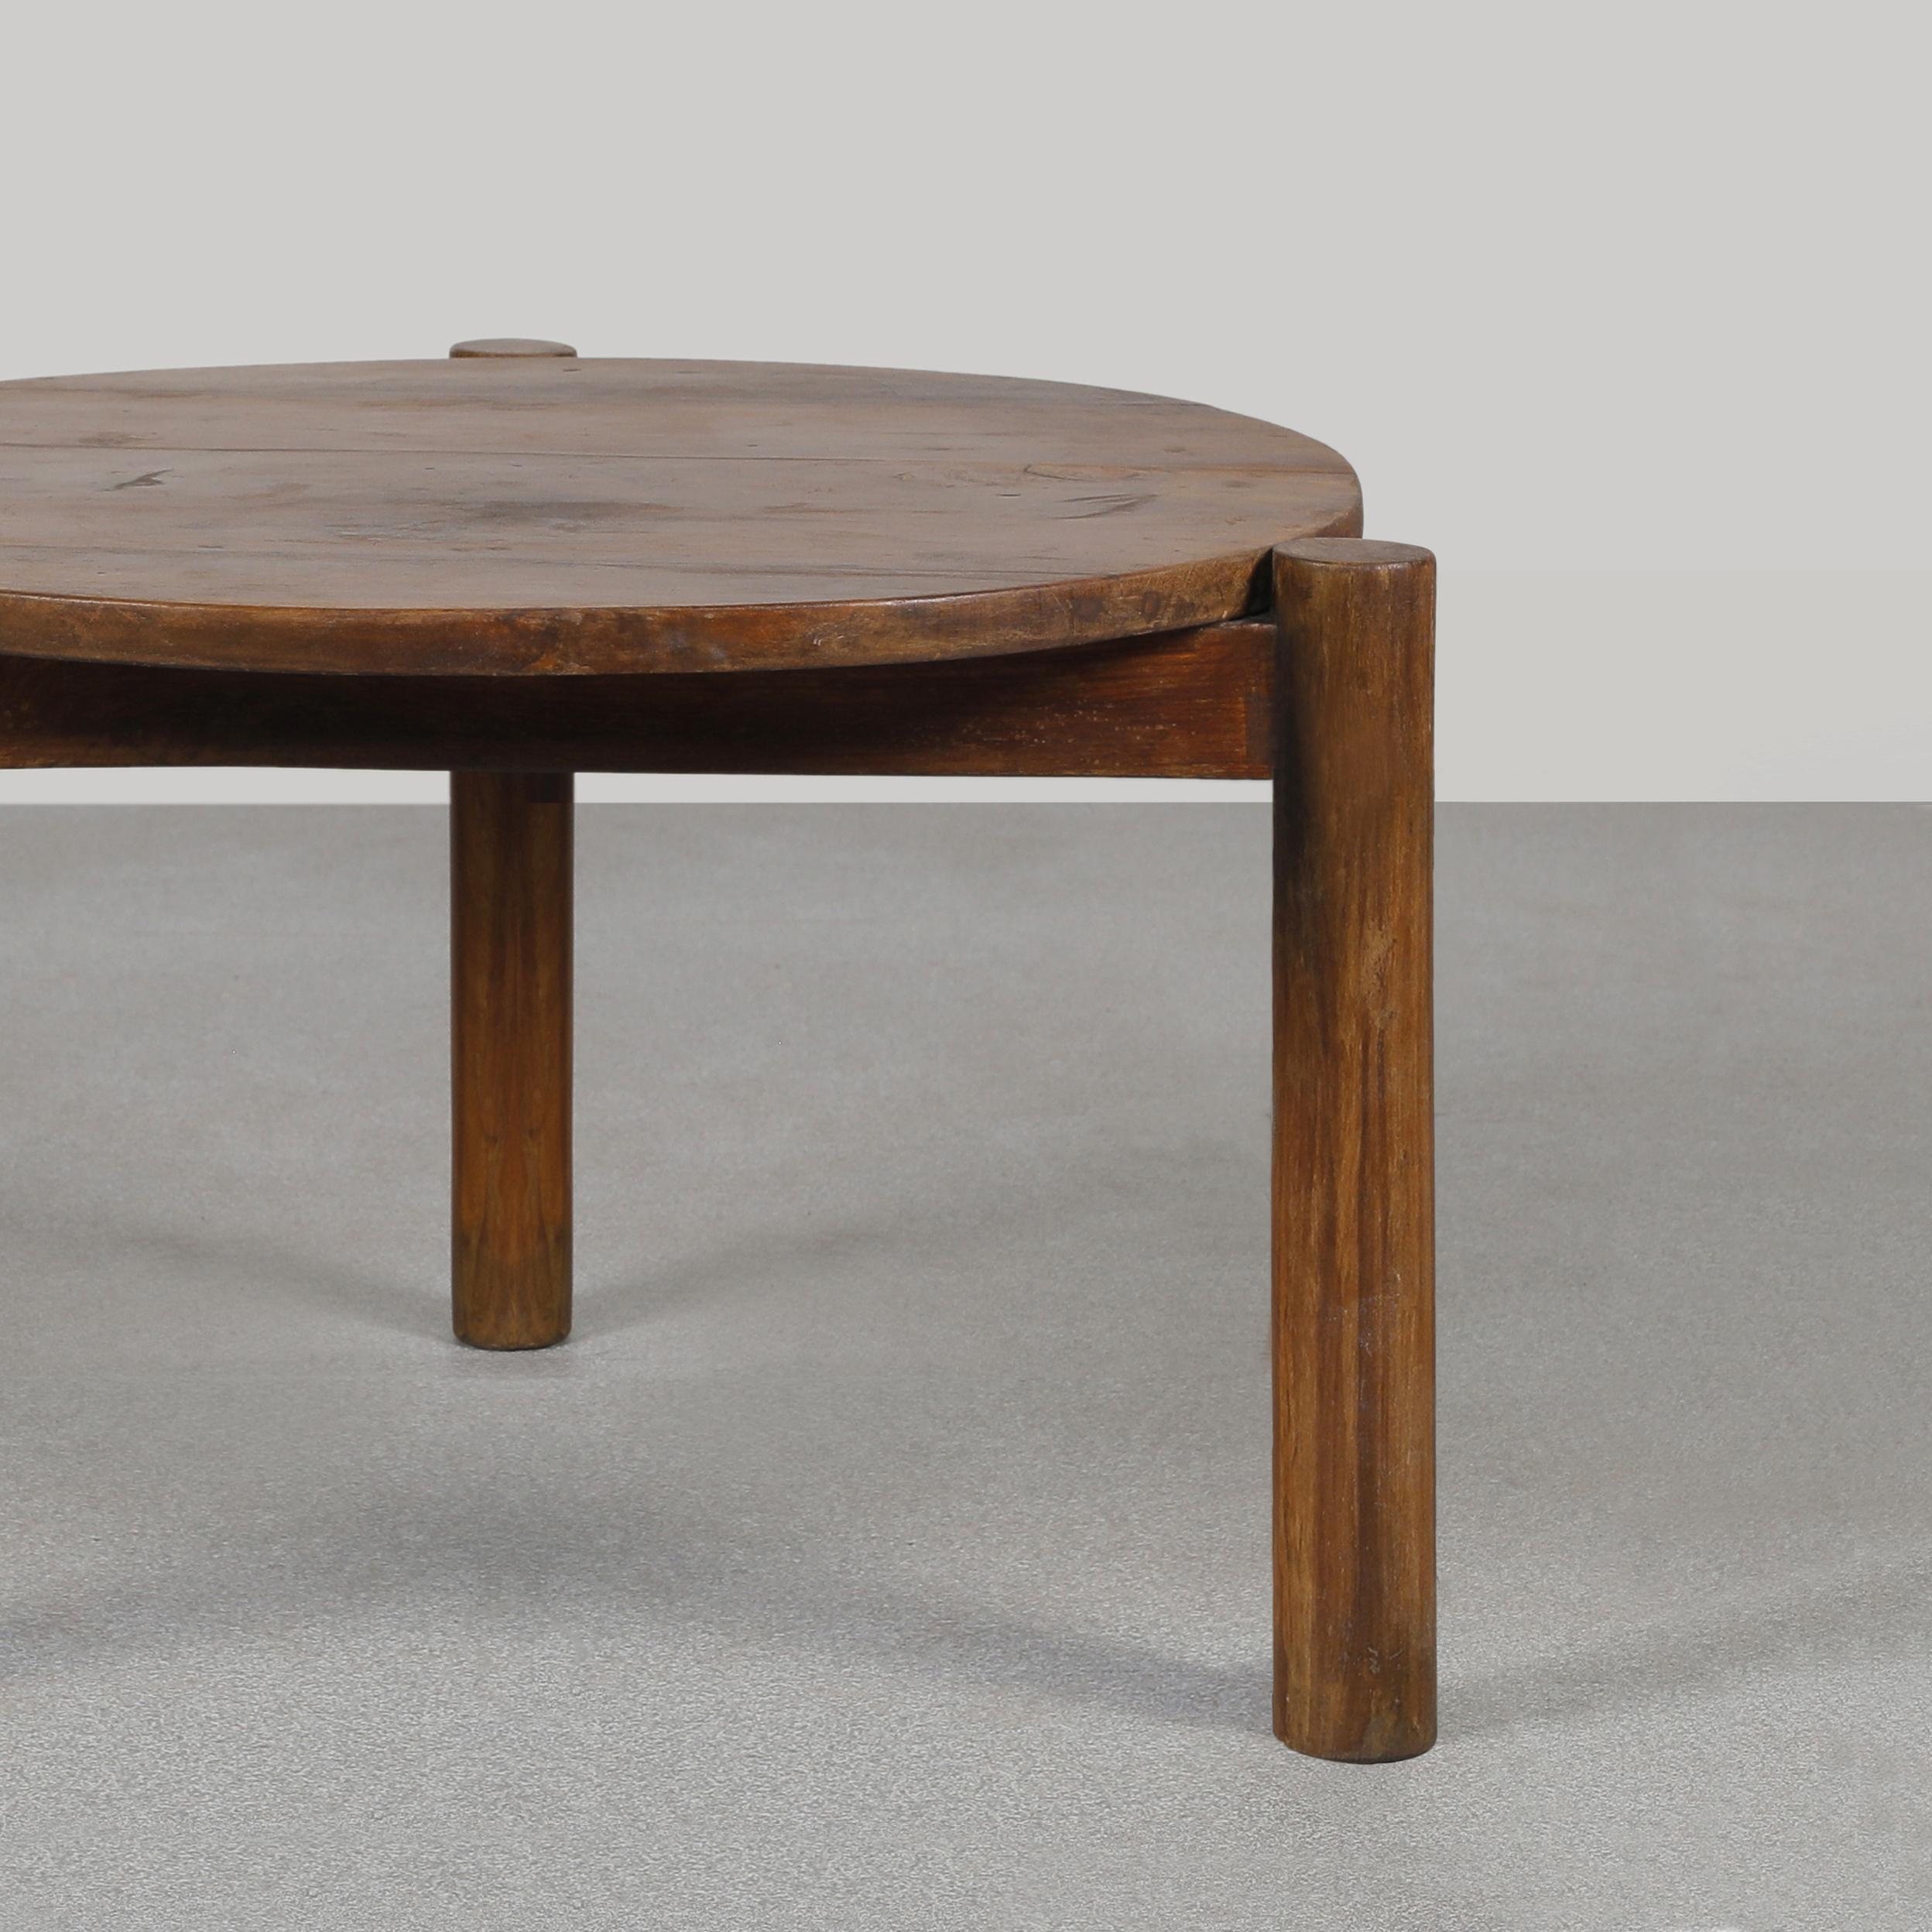 Pierre Jeanneret PJ-TB-04-A Round Low Table / Authentic Mid-Century Modern In Good Condition For Sale In Zürich, CH